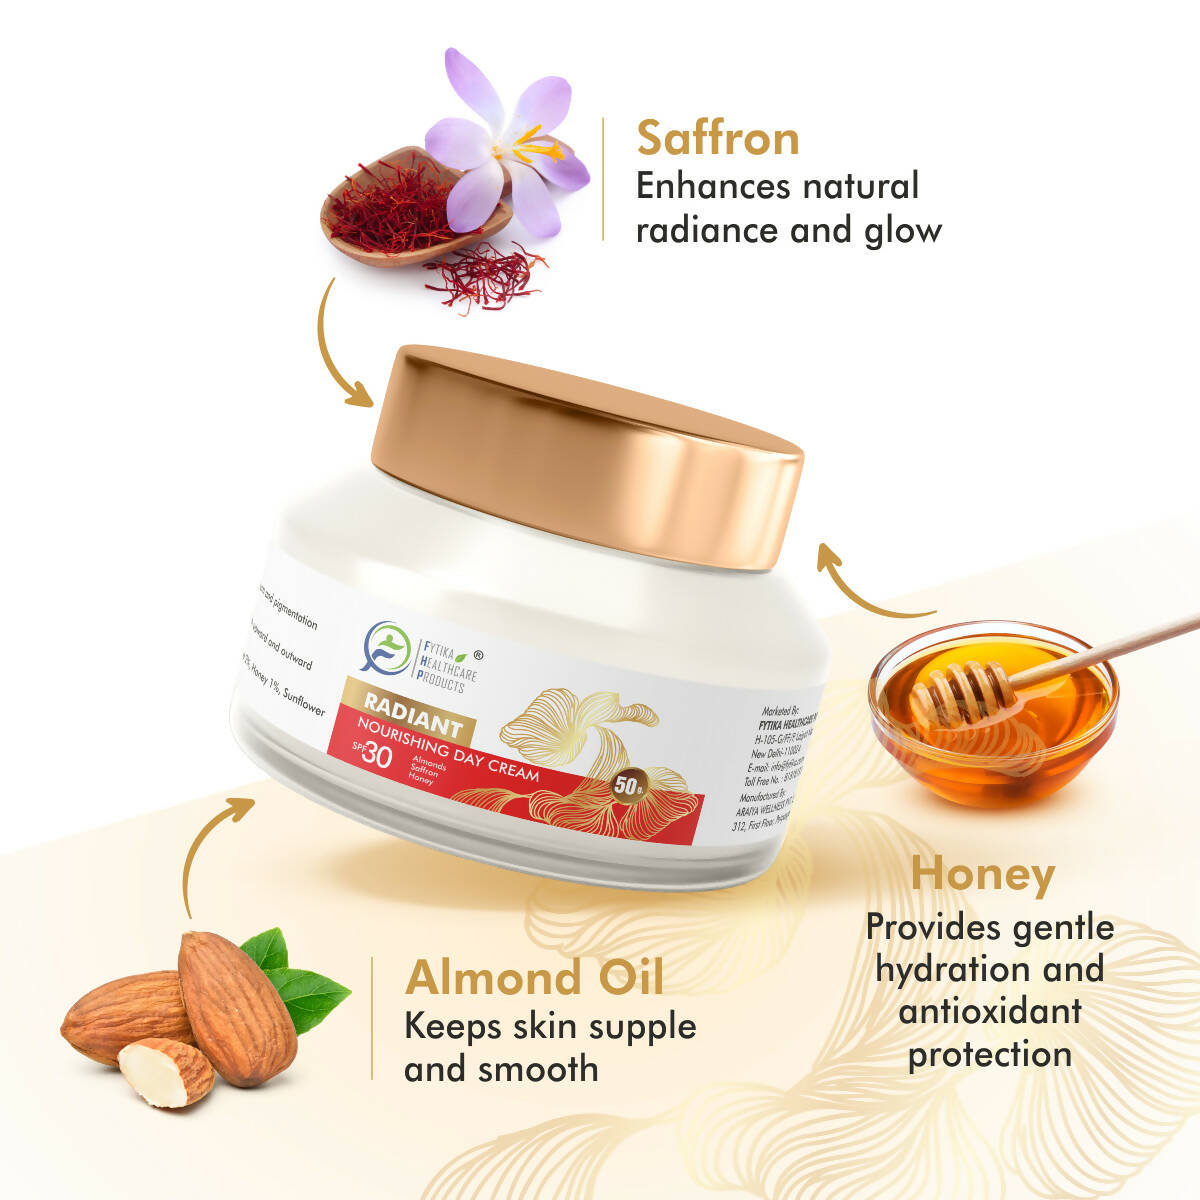 Fytika Radiant Nourishing Day Cream with Saffron, Almonds and Honey with SPF30